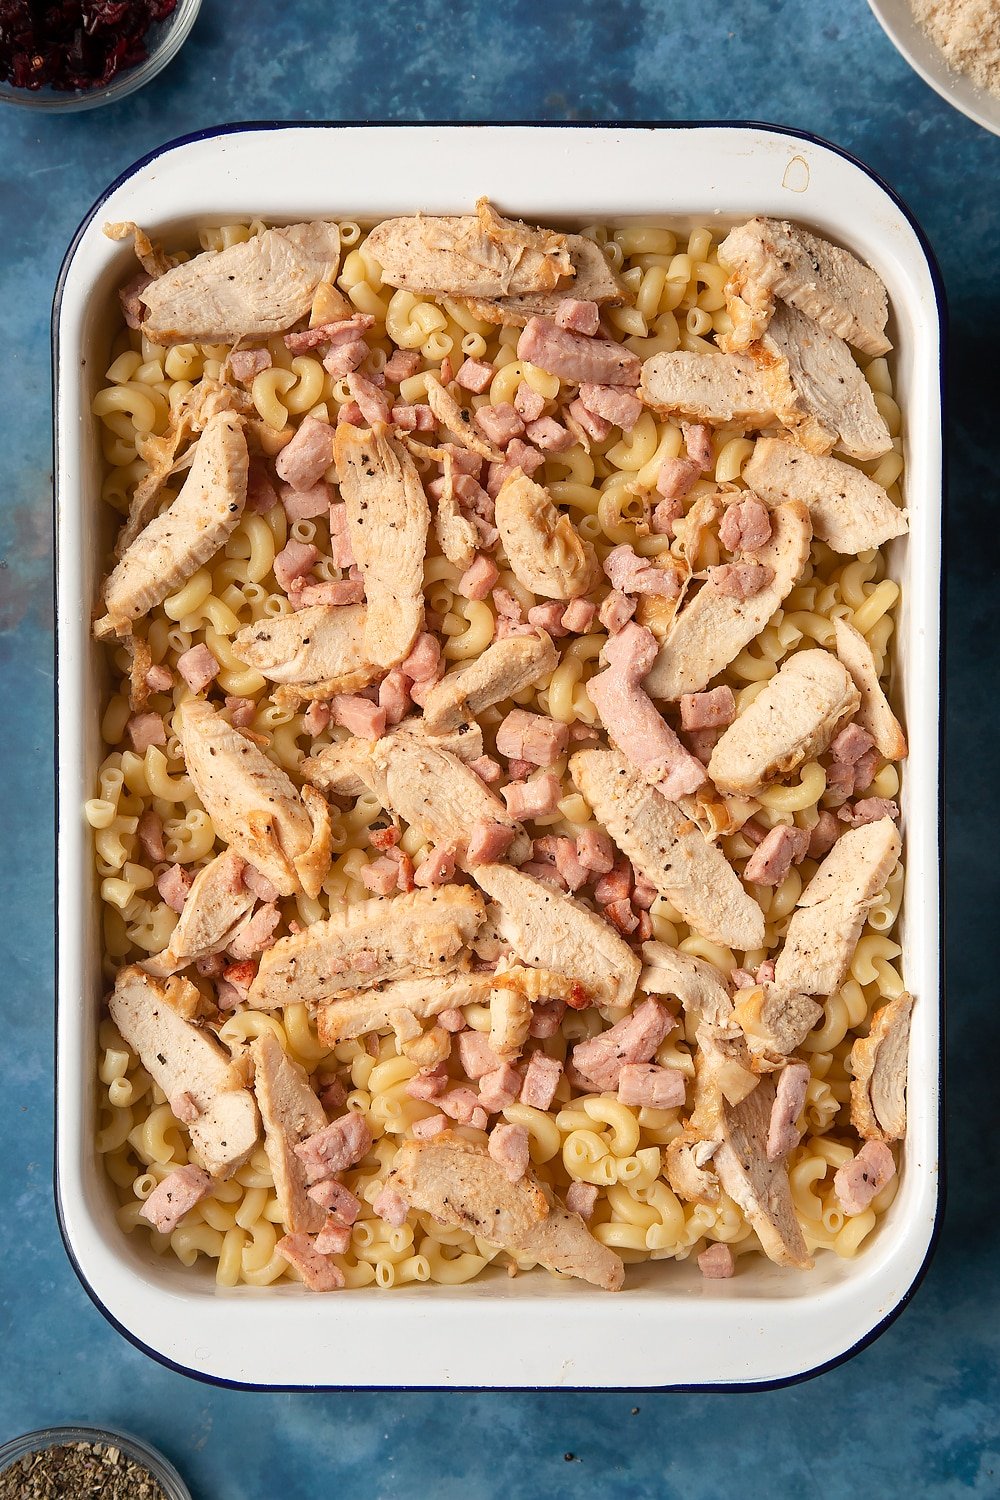 A large roasting pan filled with cooked macaroni pasta, topped with cooked chicken and bacon. The ingredients to make chicken and bacon mac and cheese surround the pan.